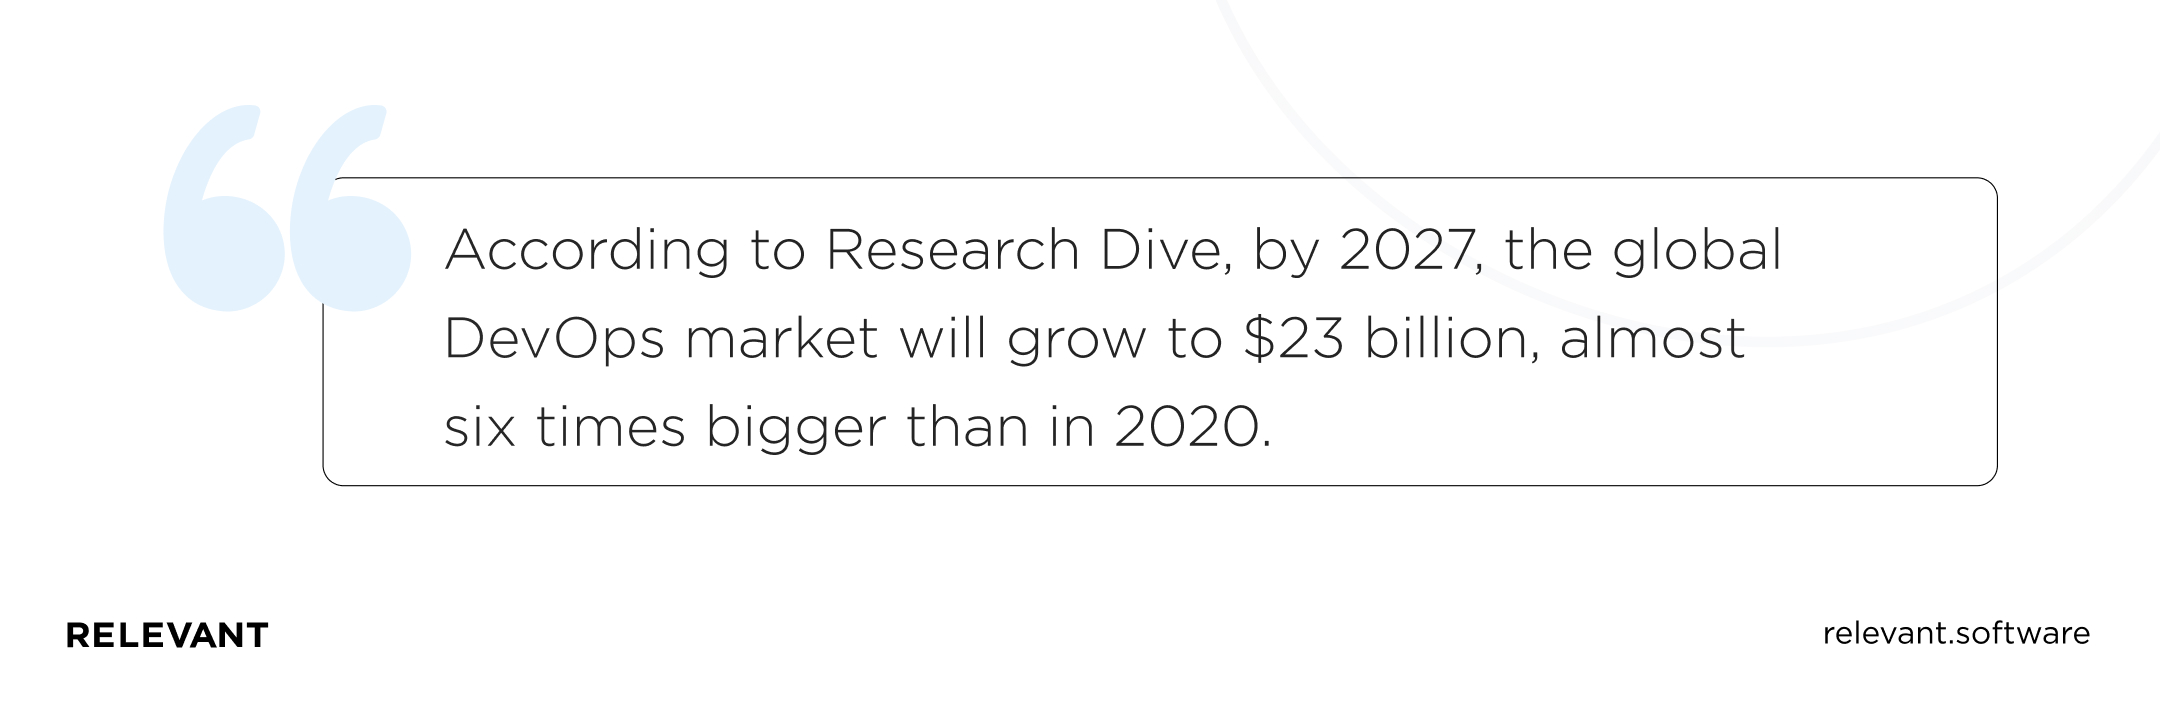 According to Research Dive, by 2027, the global DevOps market will grow to  billion, almost six times bigger than in 2020.